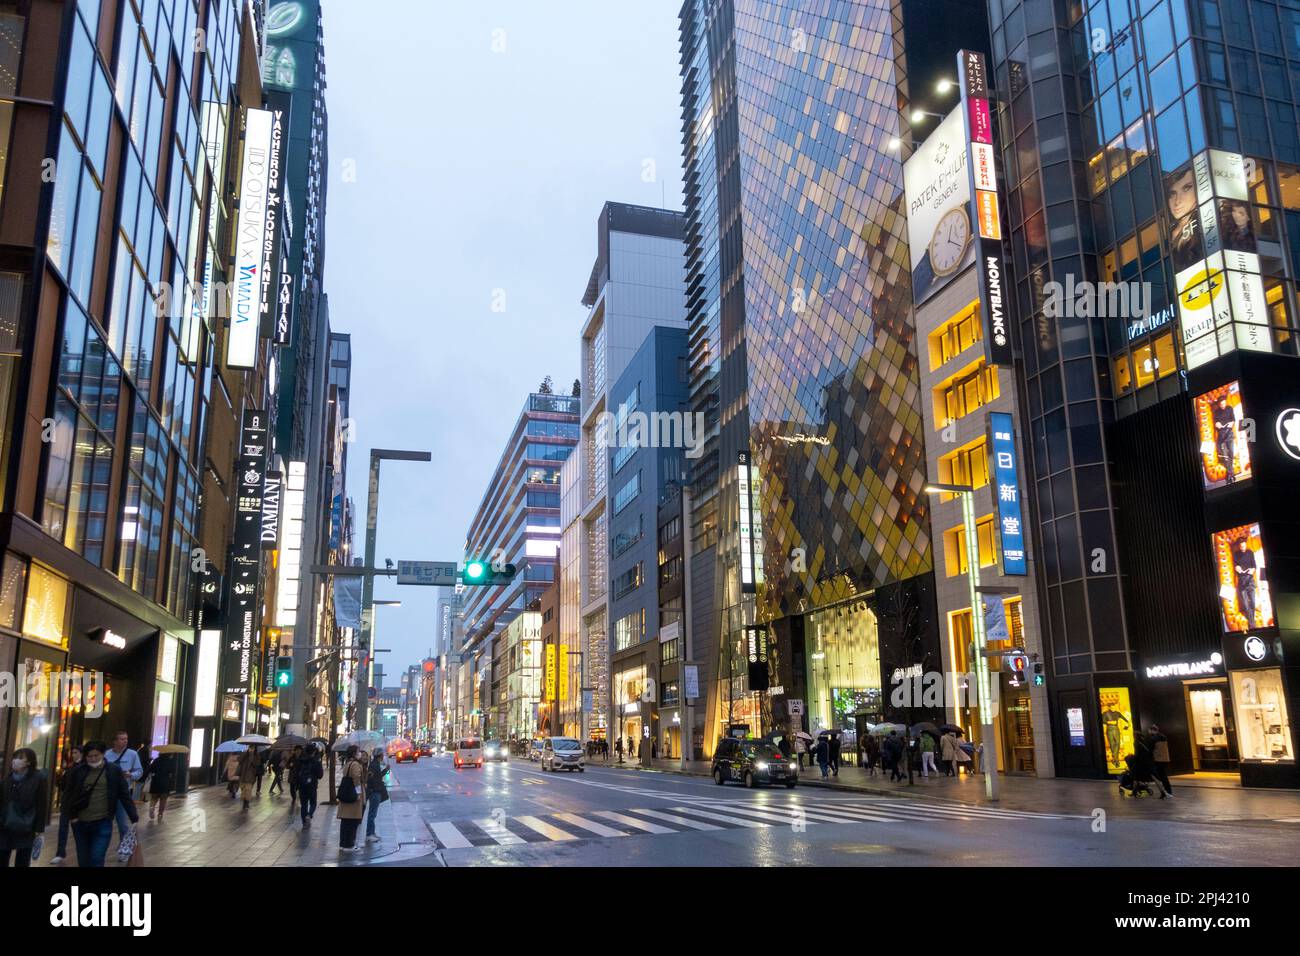 Evening view along futuristic shopping street in Ginza shopping district, Tokyo, Japan Stock Photo